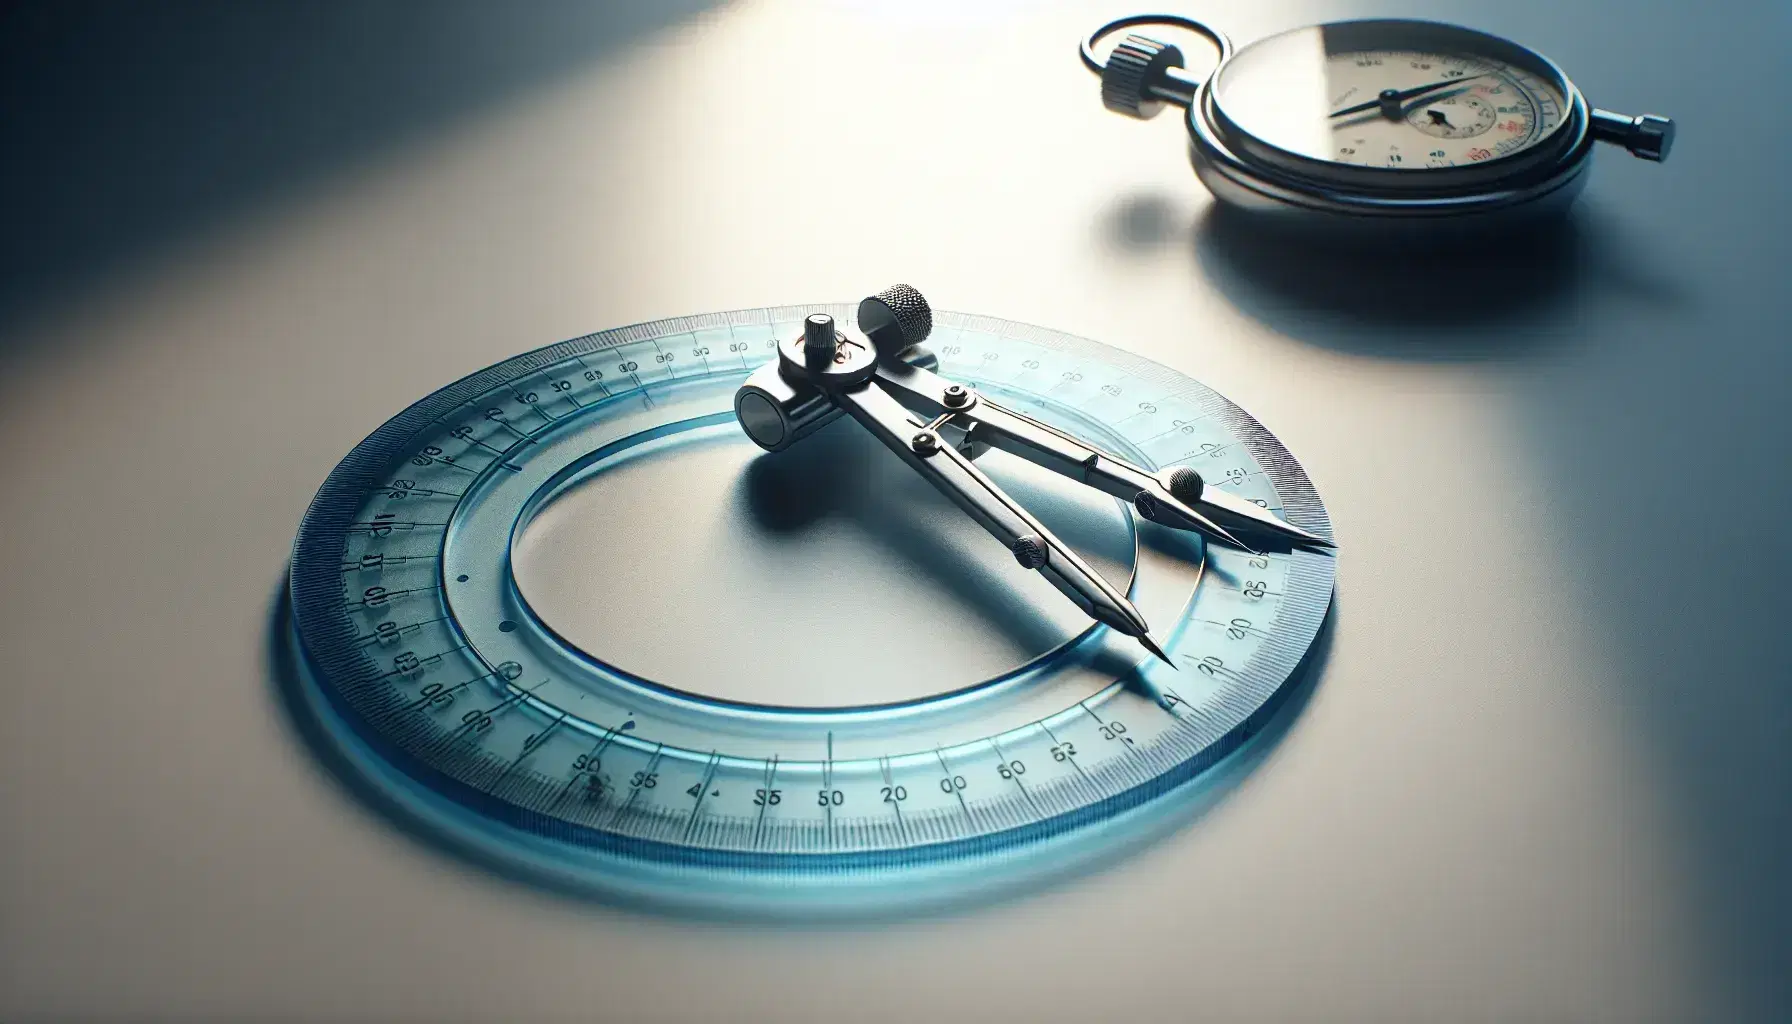 Close-up view of a transparent blue protractor and metallic compasses on a light surface, with a blurred stopwatch in the background.